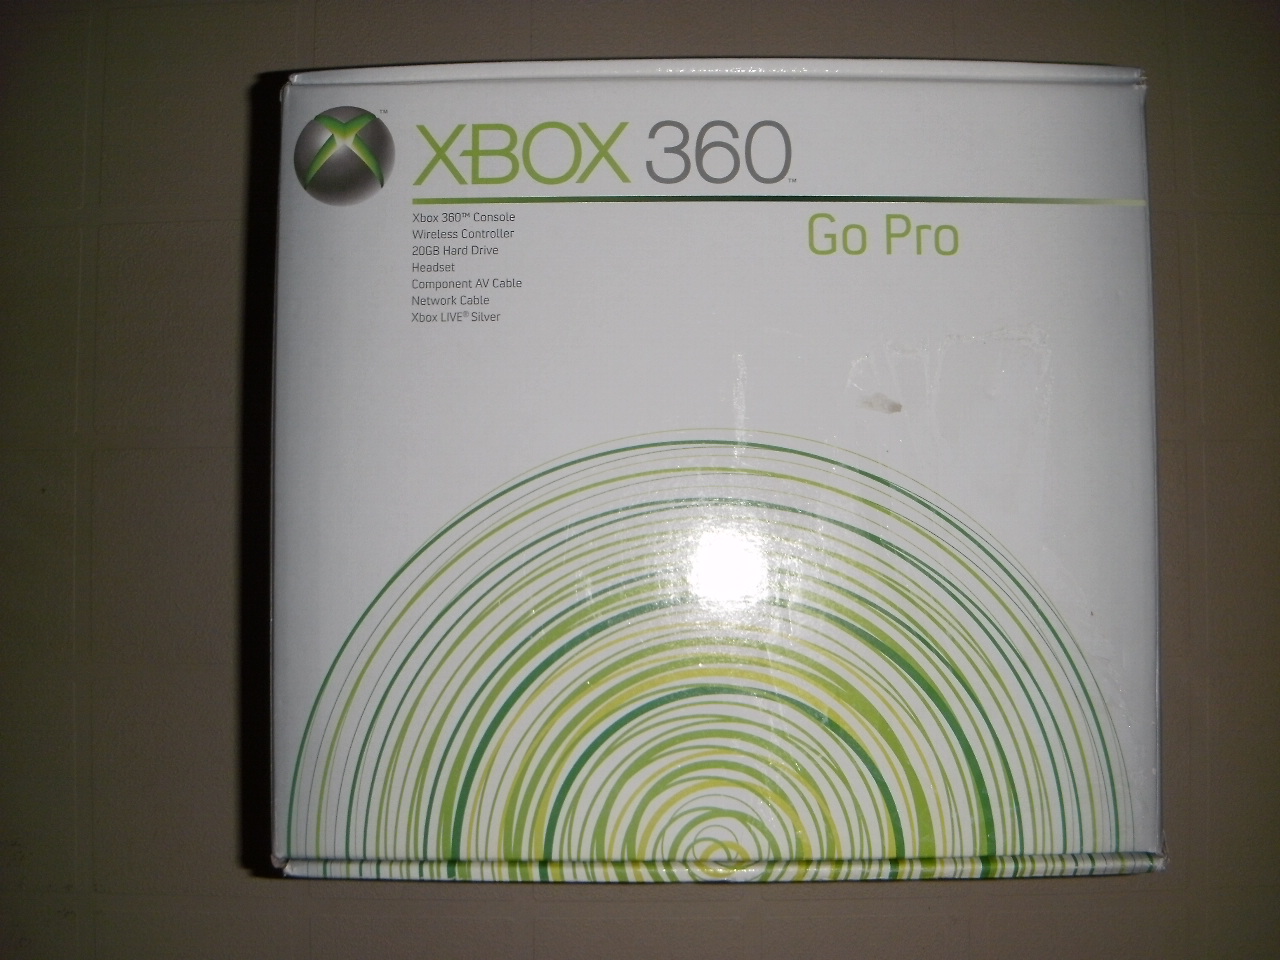 Xbox 360 is fully loaded.